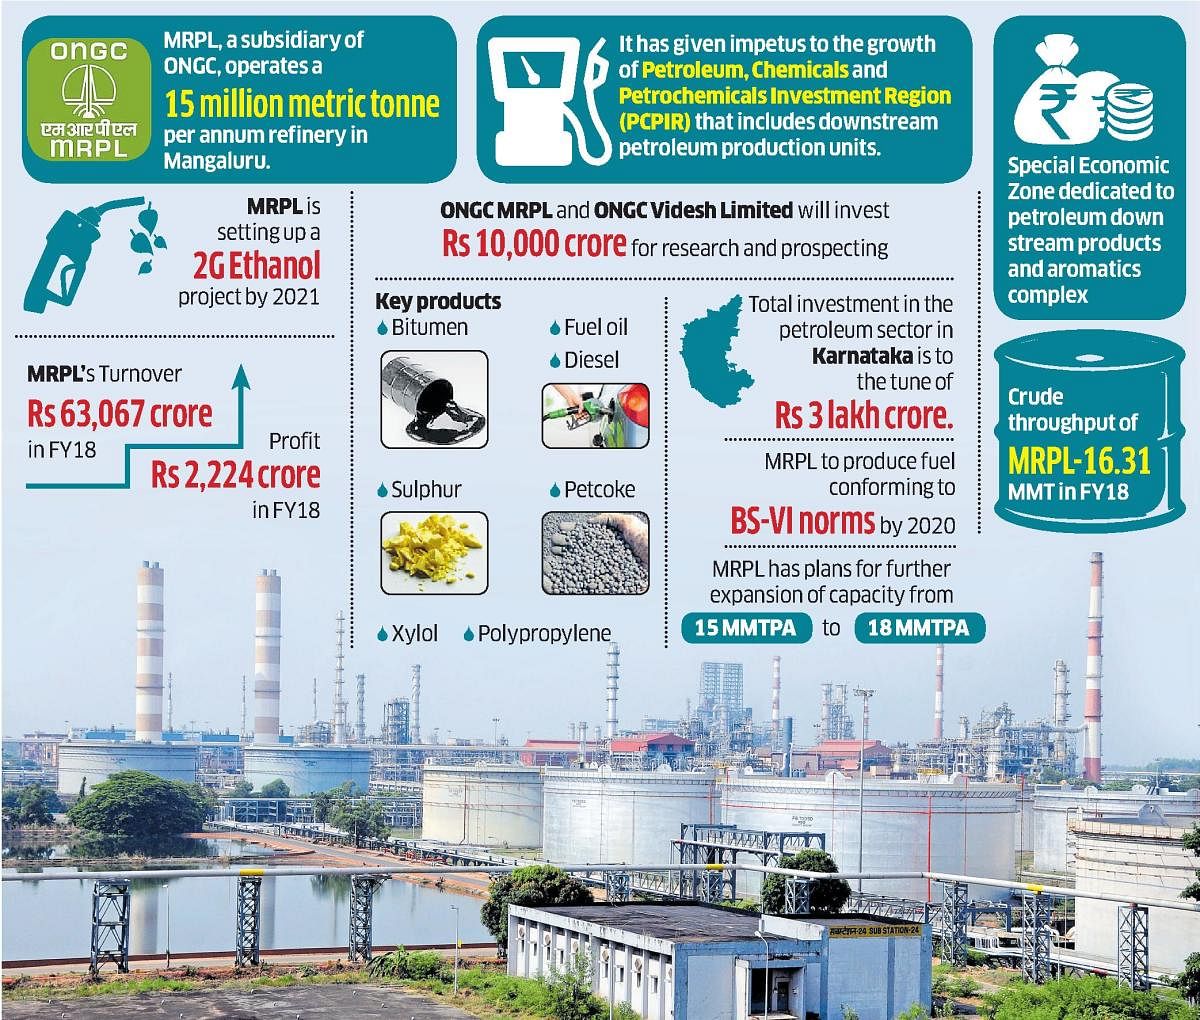 This grassroot refinery has a capacity to process 15 million metric tonnes per annum crude, and is the only refinery in India to have two hydrocrackers producing premium diesel. It also has a Polypropylene unit with a capacity of 4,40,000 MT per annum. Th